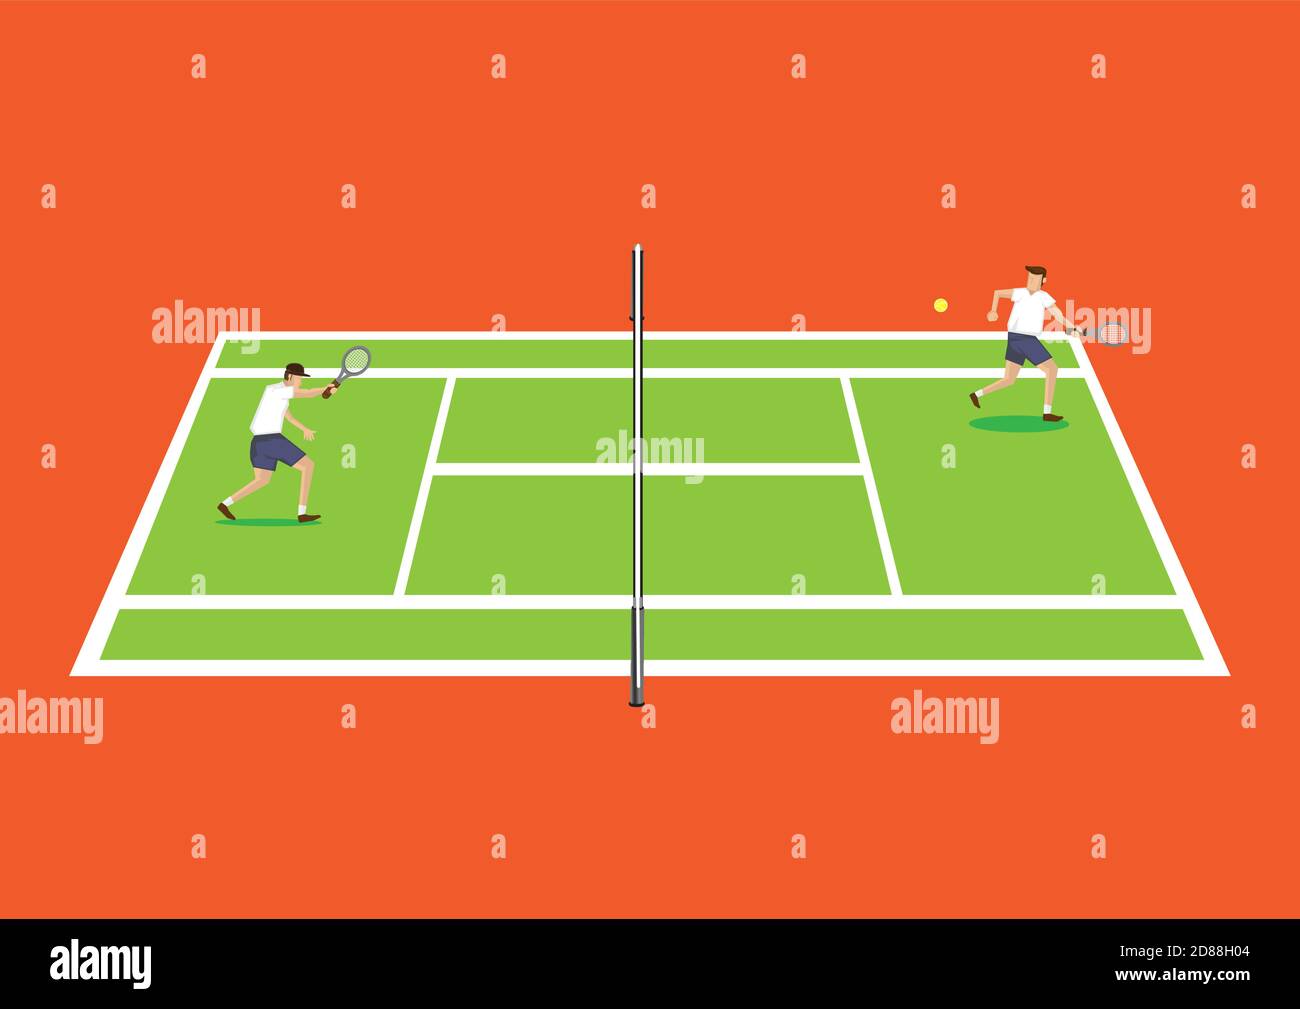 Vector illustration of two tennis players having a game in tennis court from the side in elevation view isolated on vibrant orange background. Stock Vector